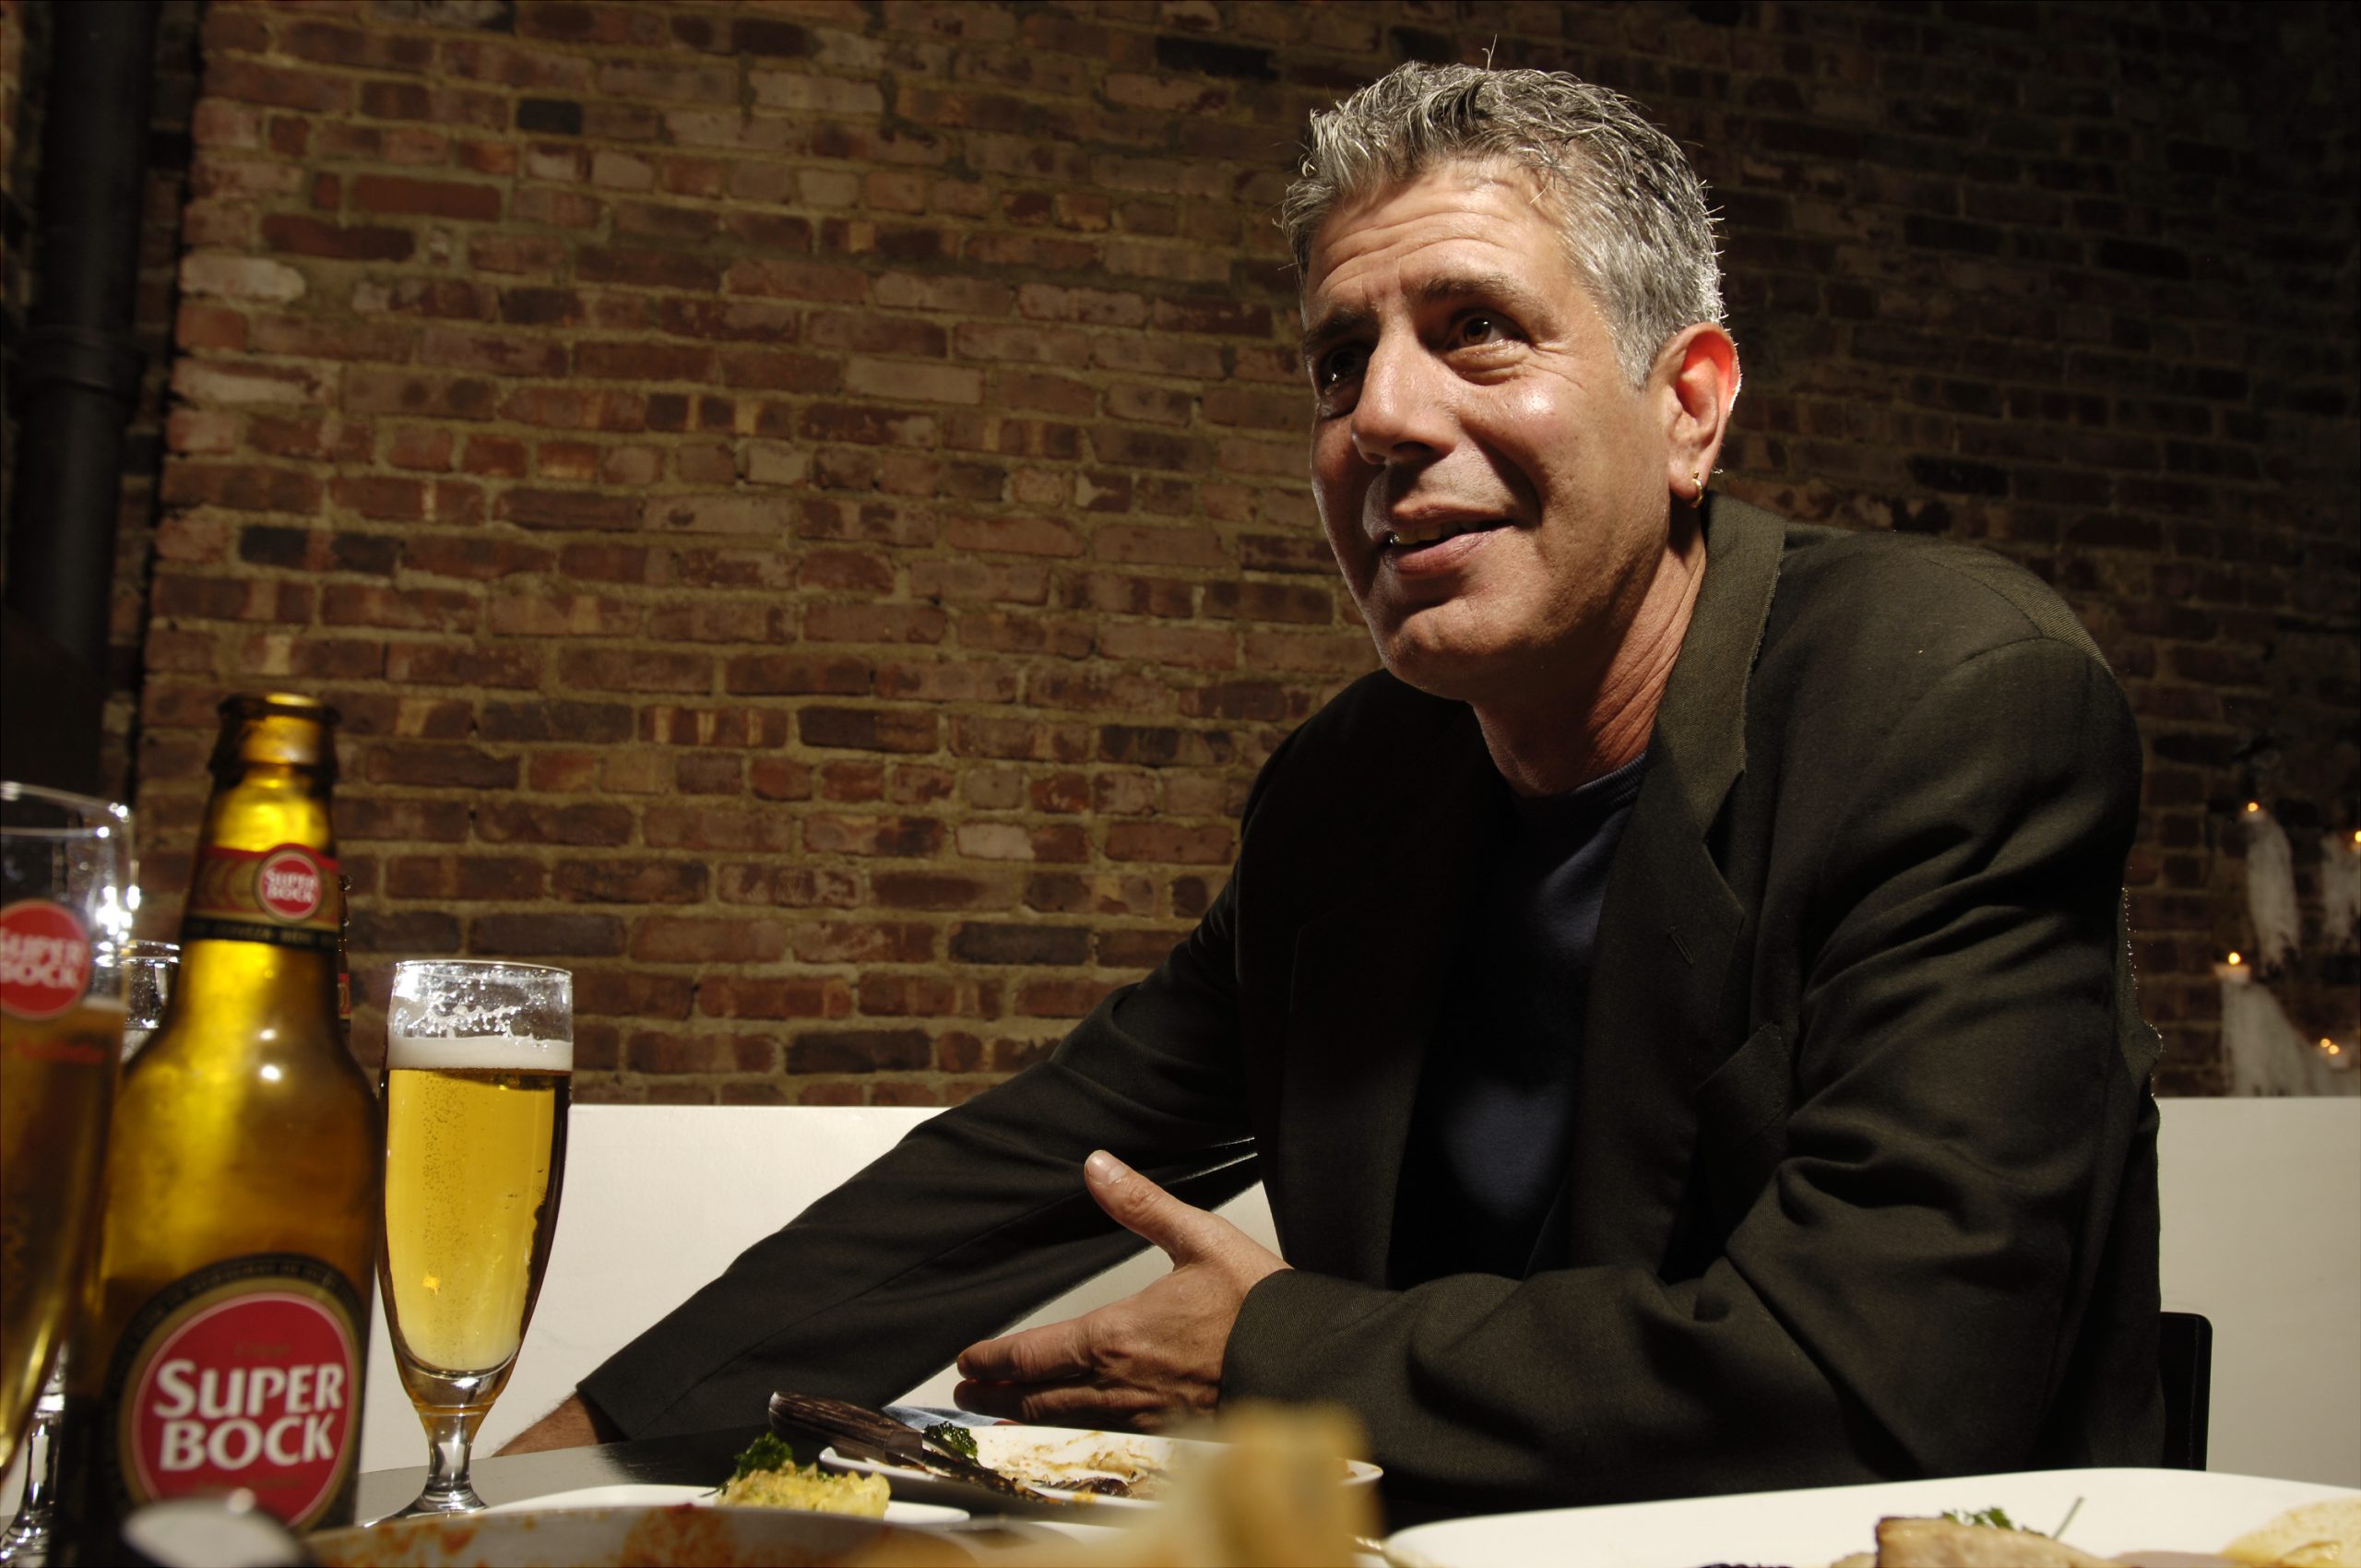 The late celebrity chef Anthony Bourdain